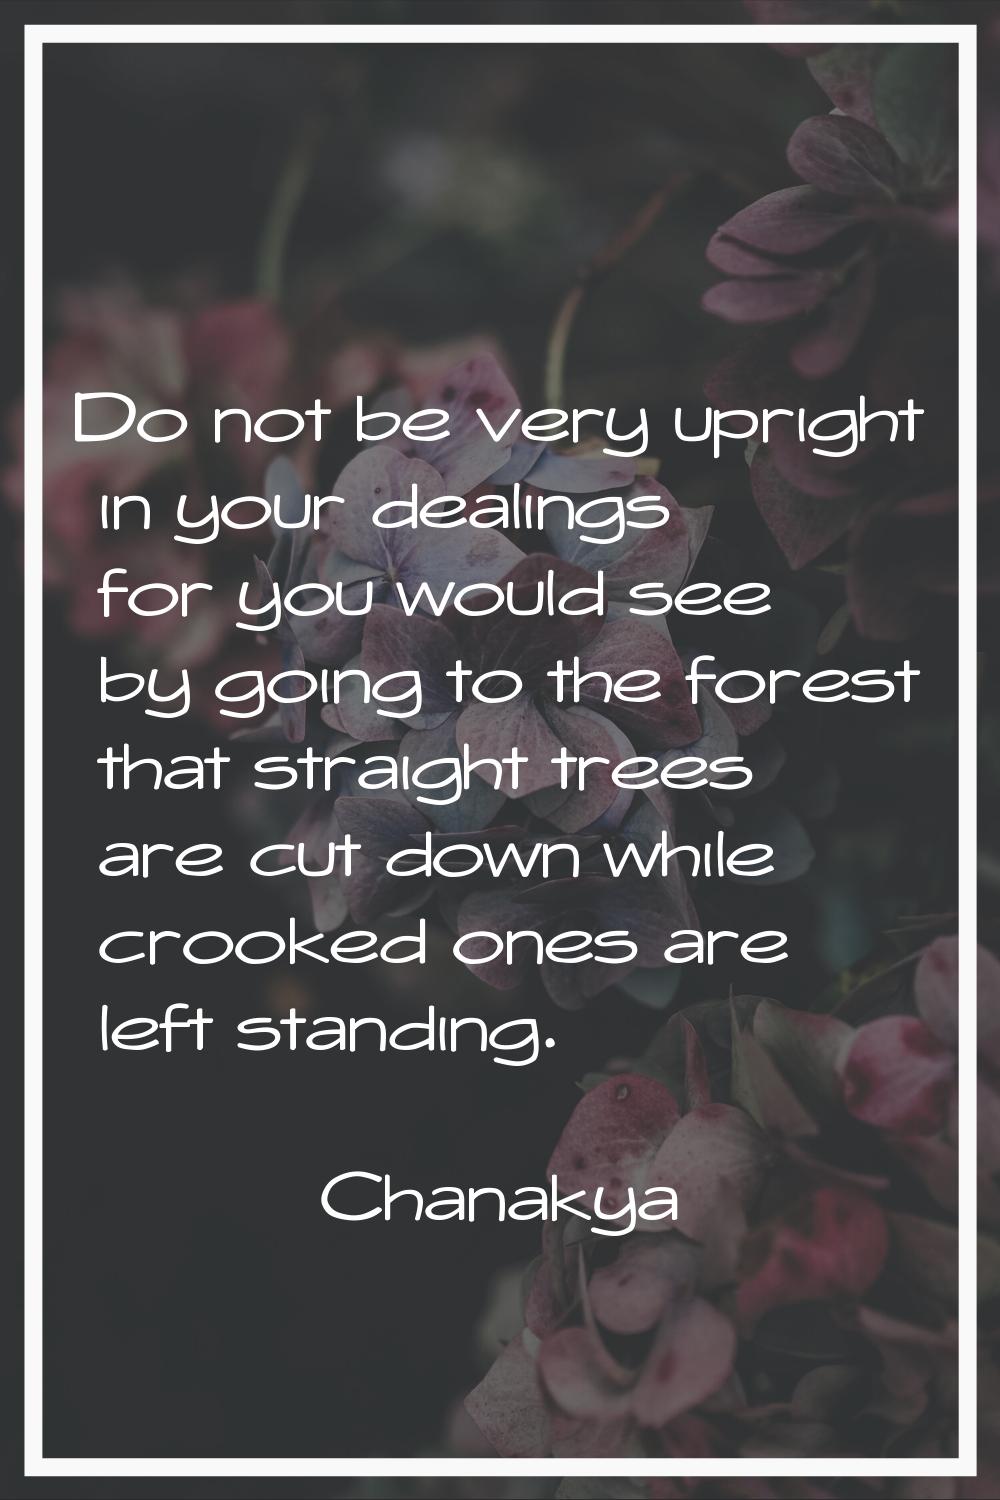 Do not be very upright in your dealings for you would see by going to the forest that straight tree